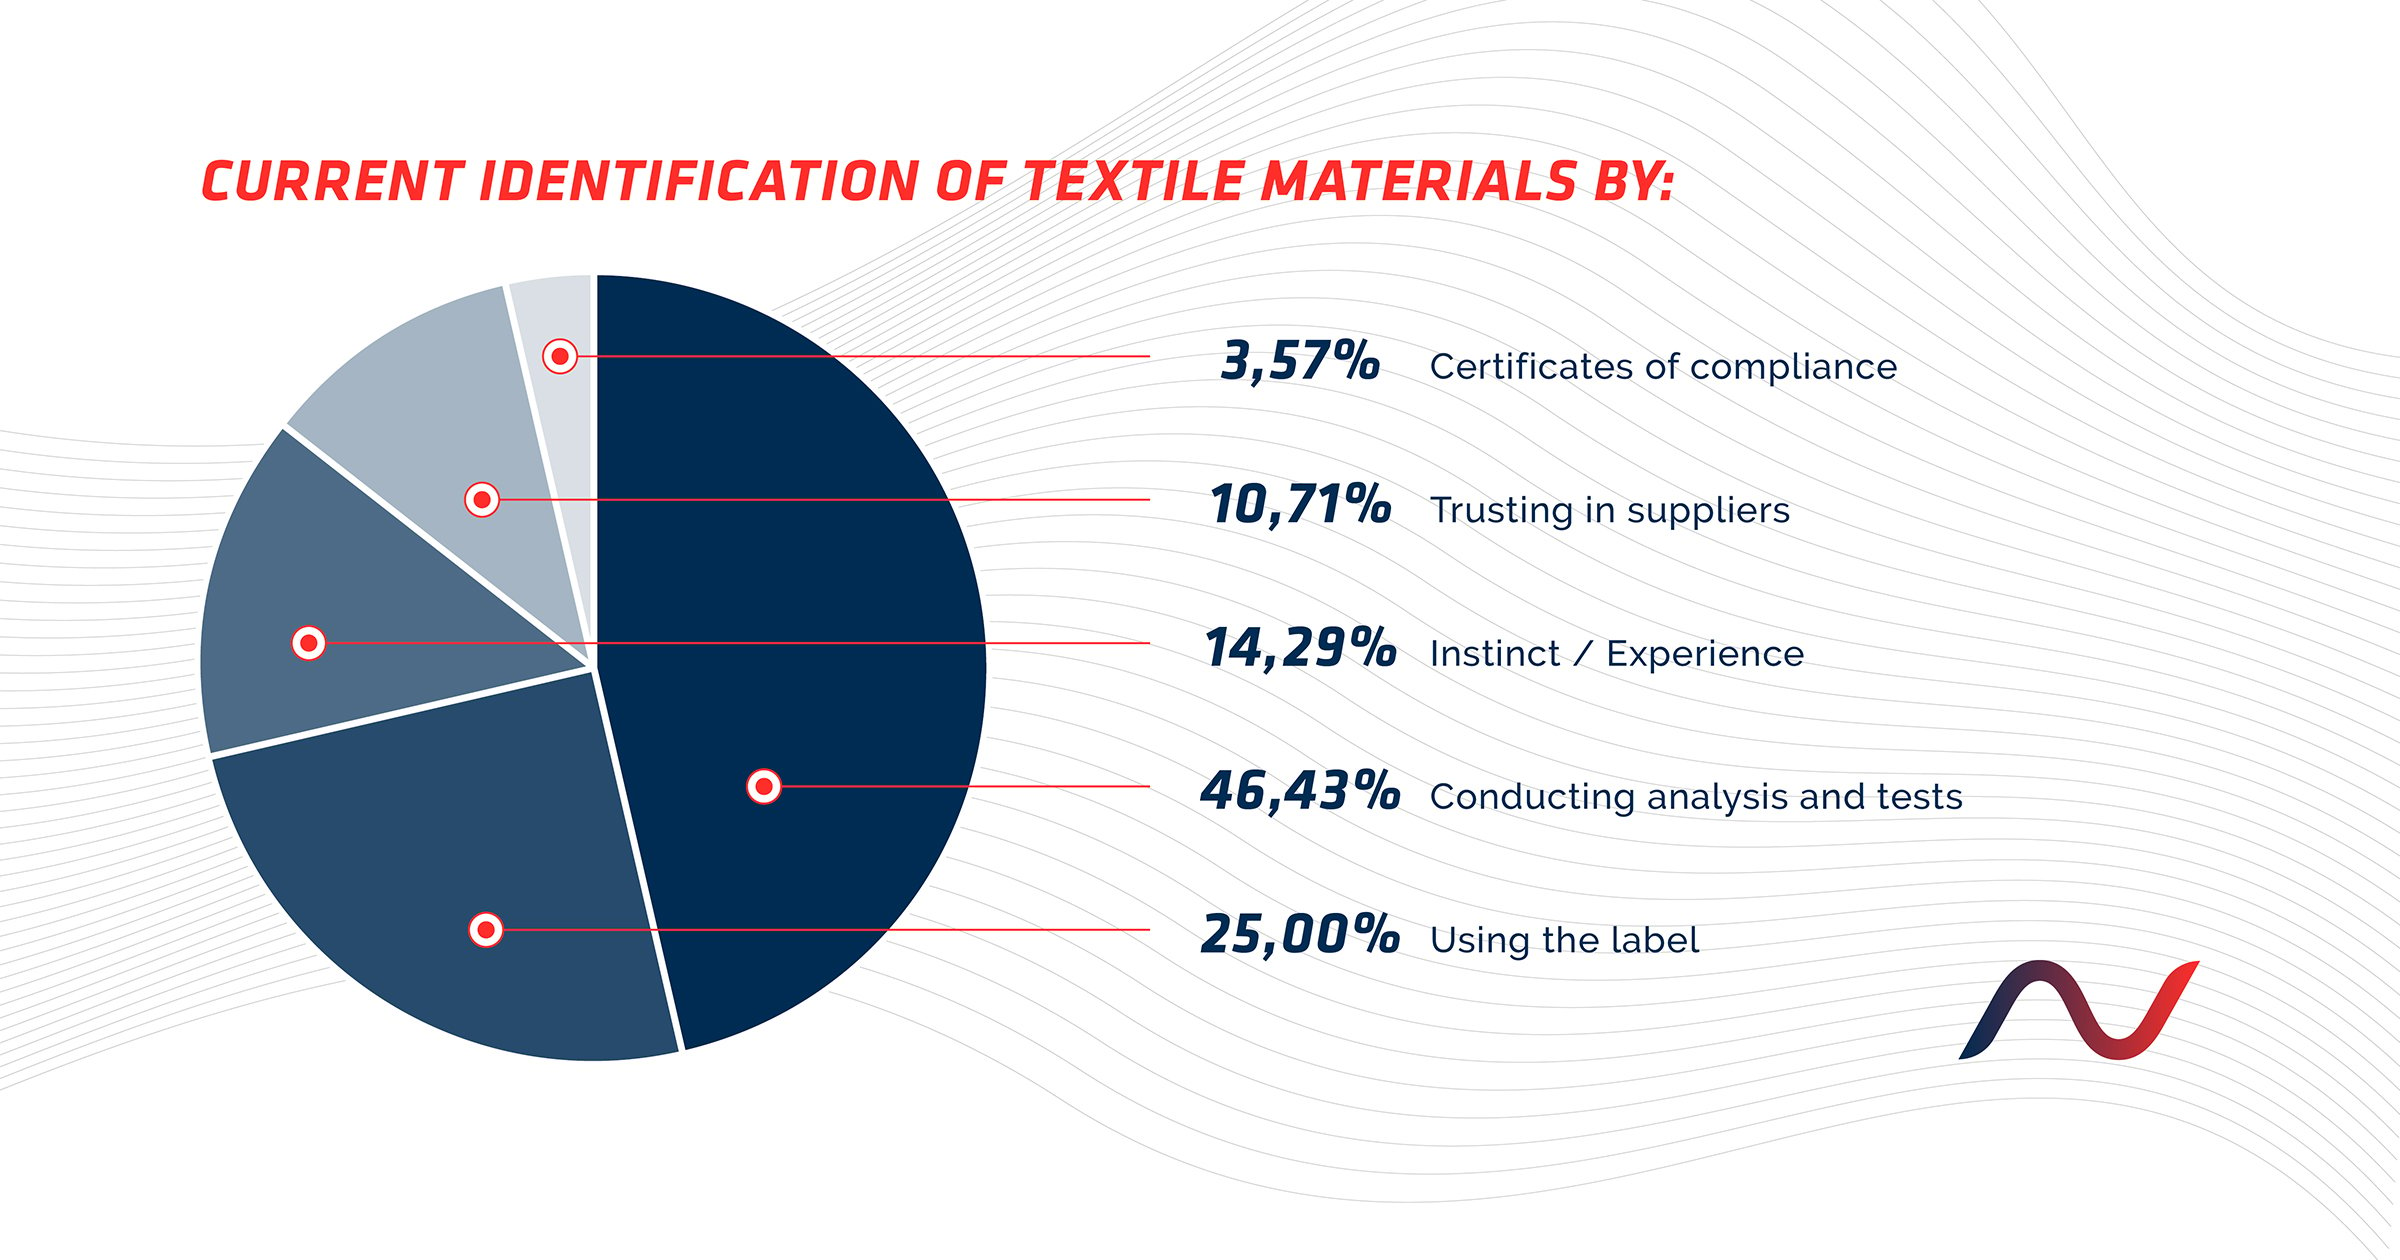 Market_research_result_textile_identfication